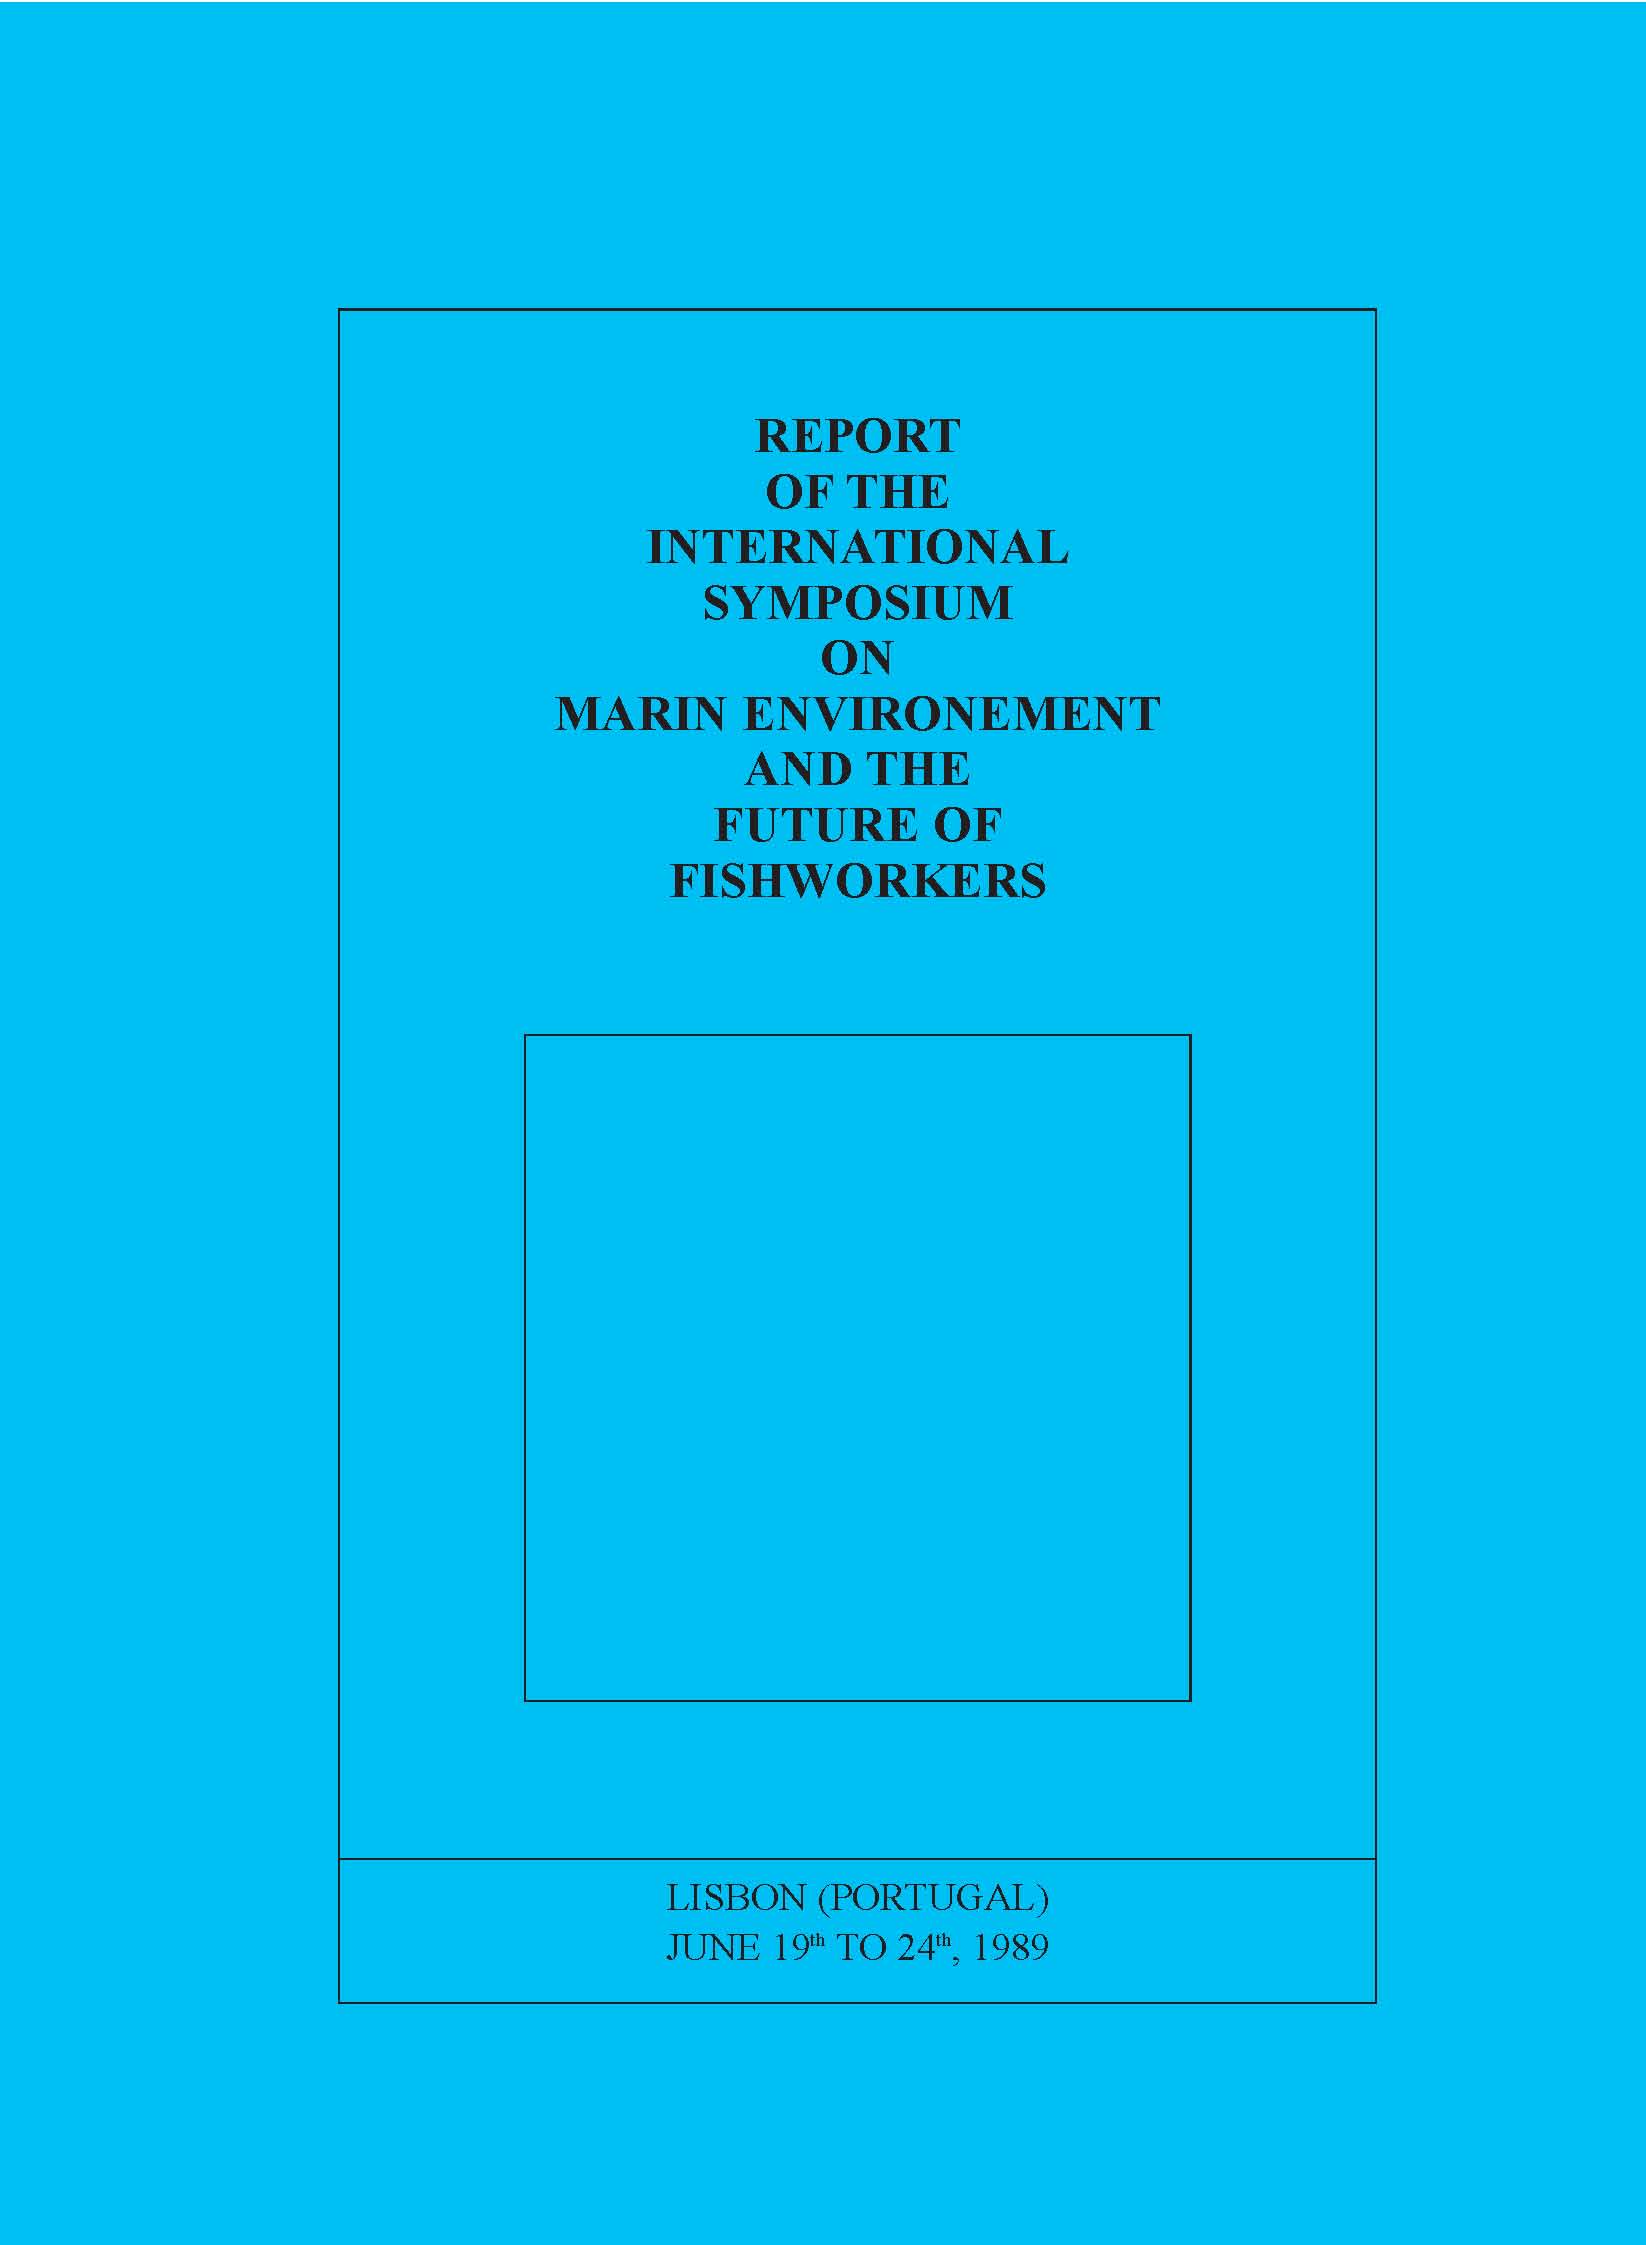 Report of the International Symposium on Marine Environment and the Future of Fishworkers, Lisbon, Portugal, 19-24 June 1989